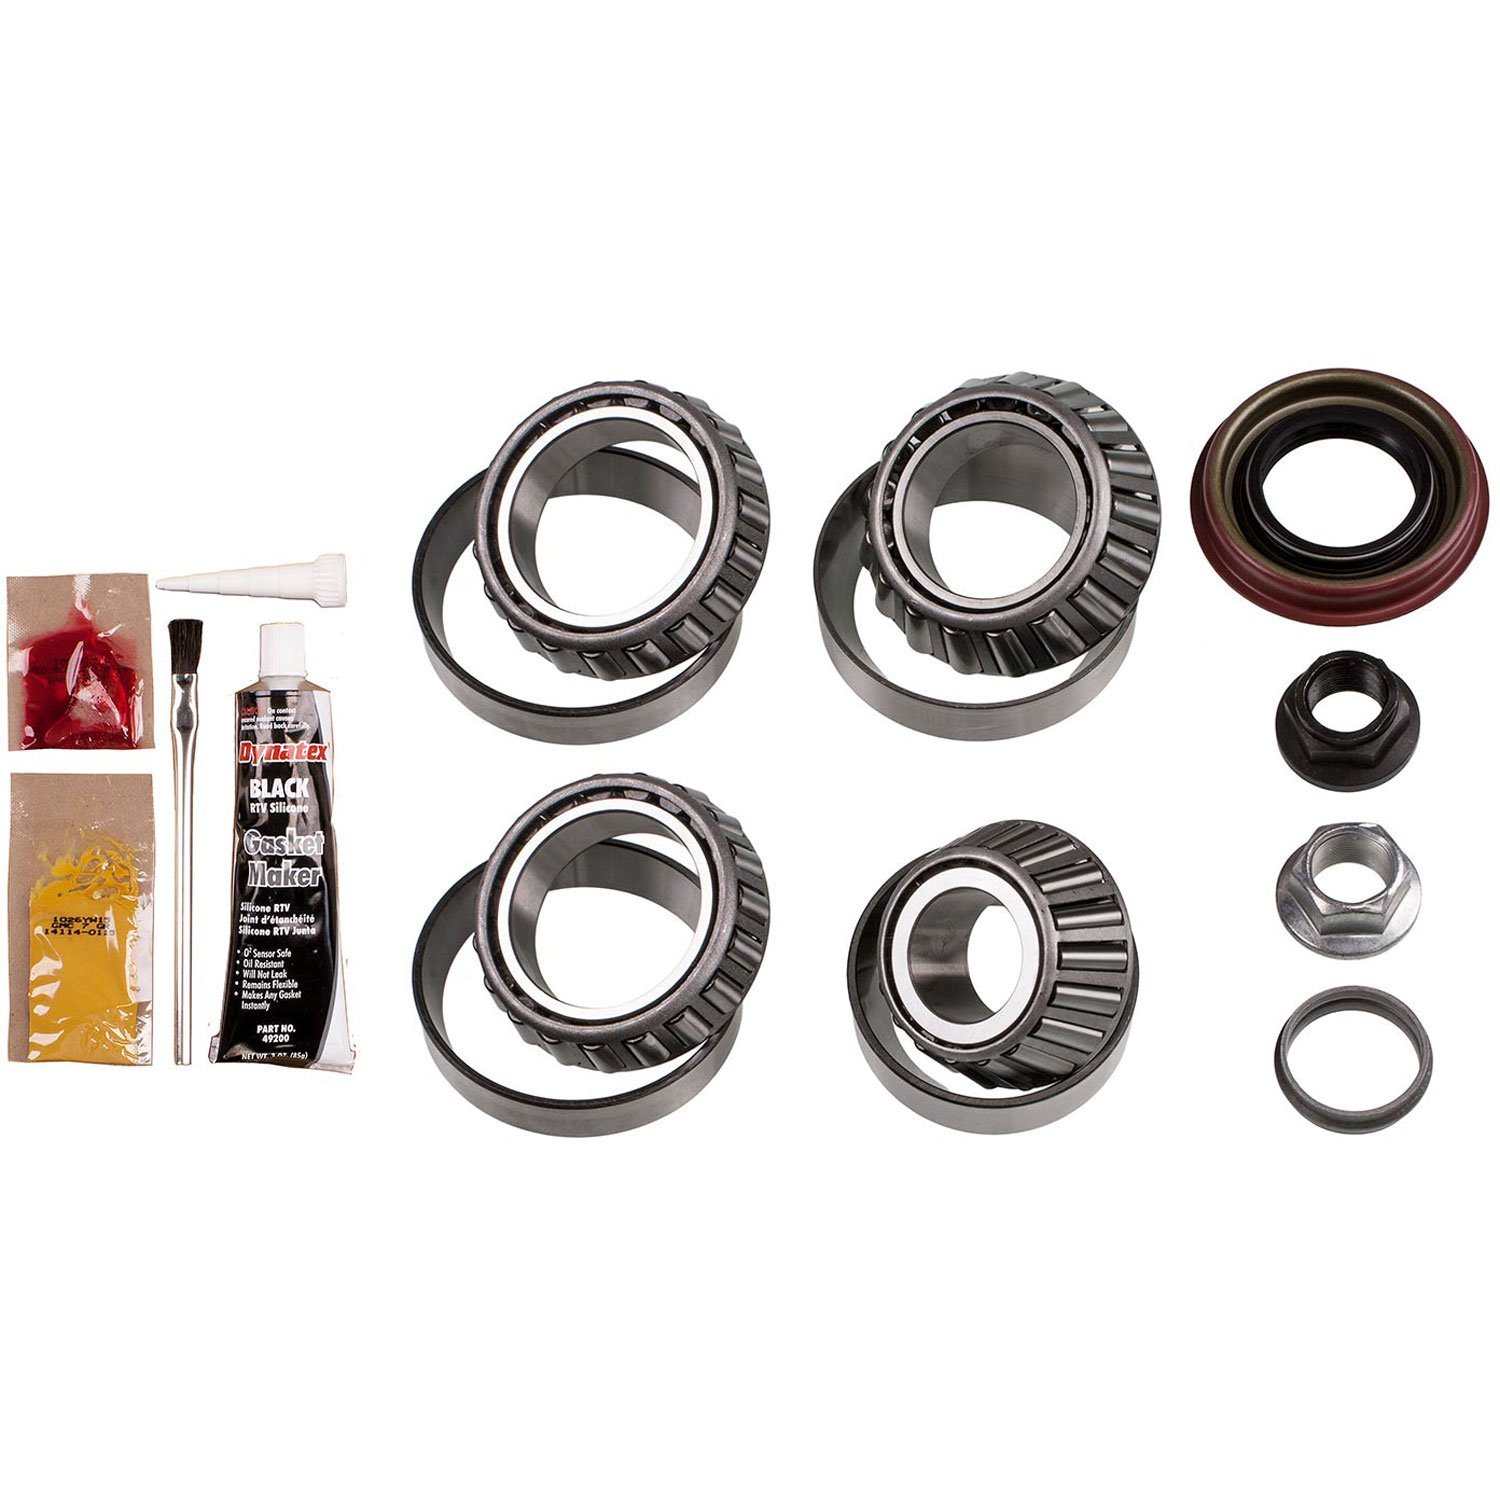 Differential Bearing Kit for 1999.5-2010 Ford 9.75 in. 12-Bolt